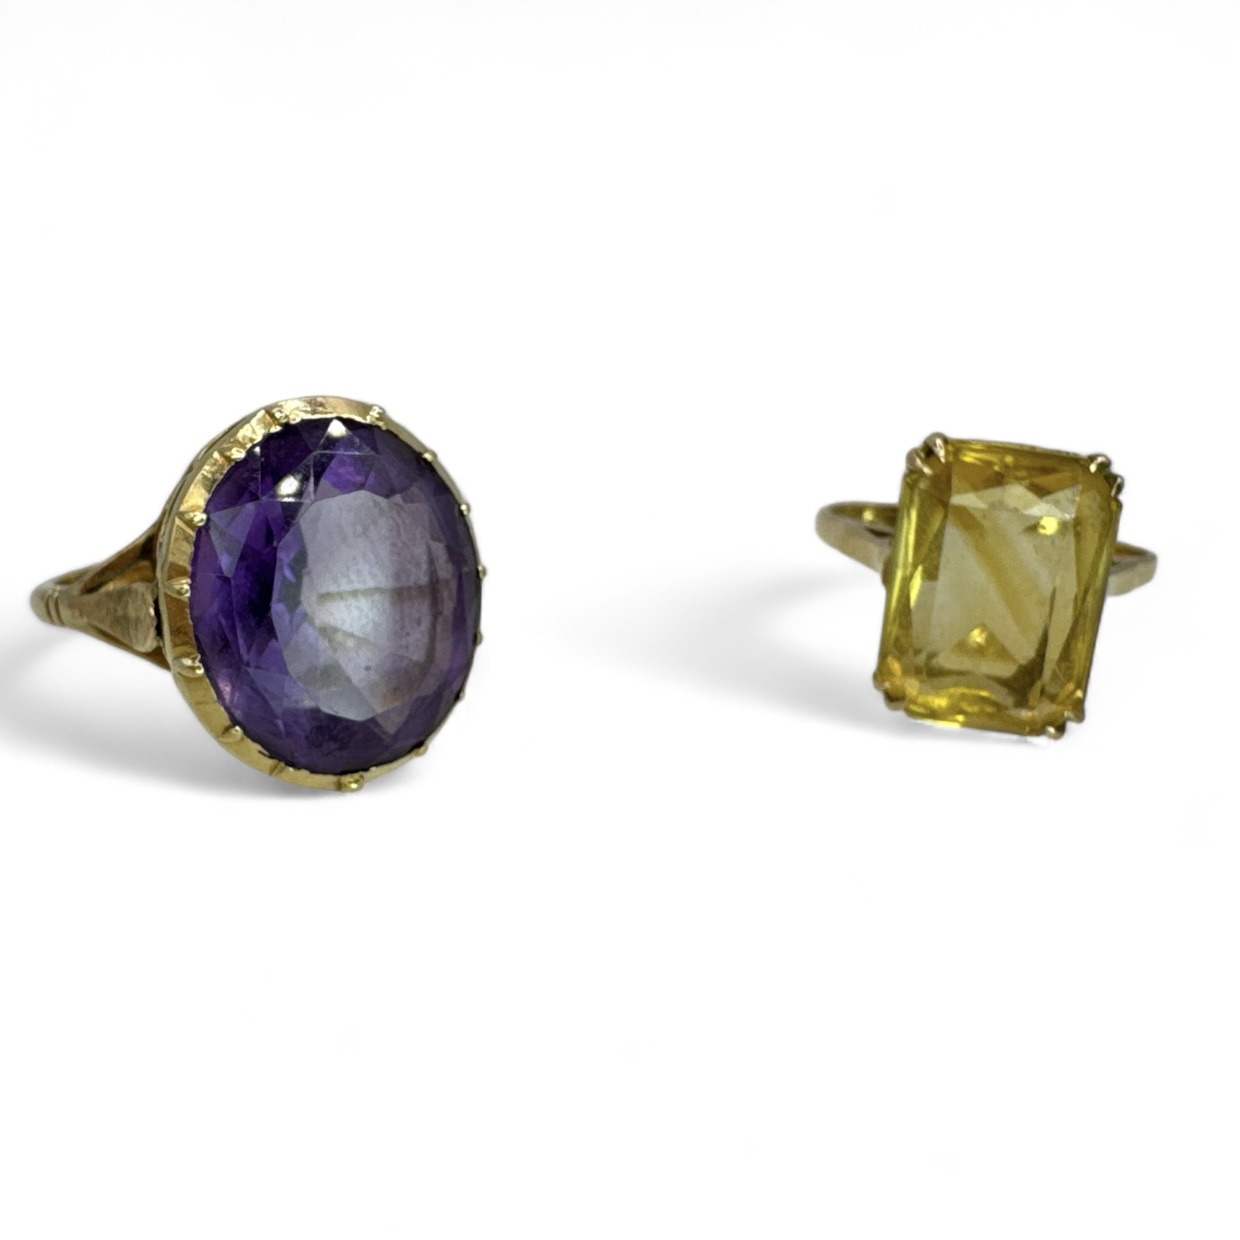 Two gem set cocktail rings - one in 9ct gold, the other stamped "15ct". The 9ct gold ring is set